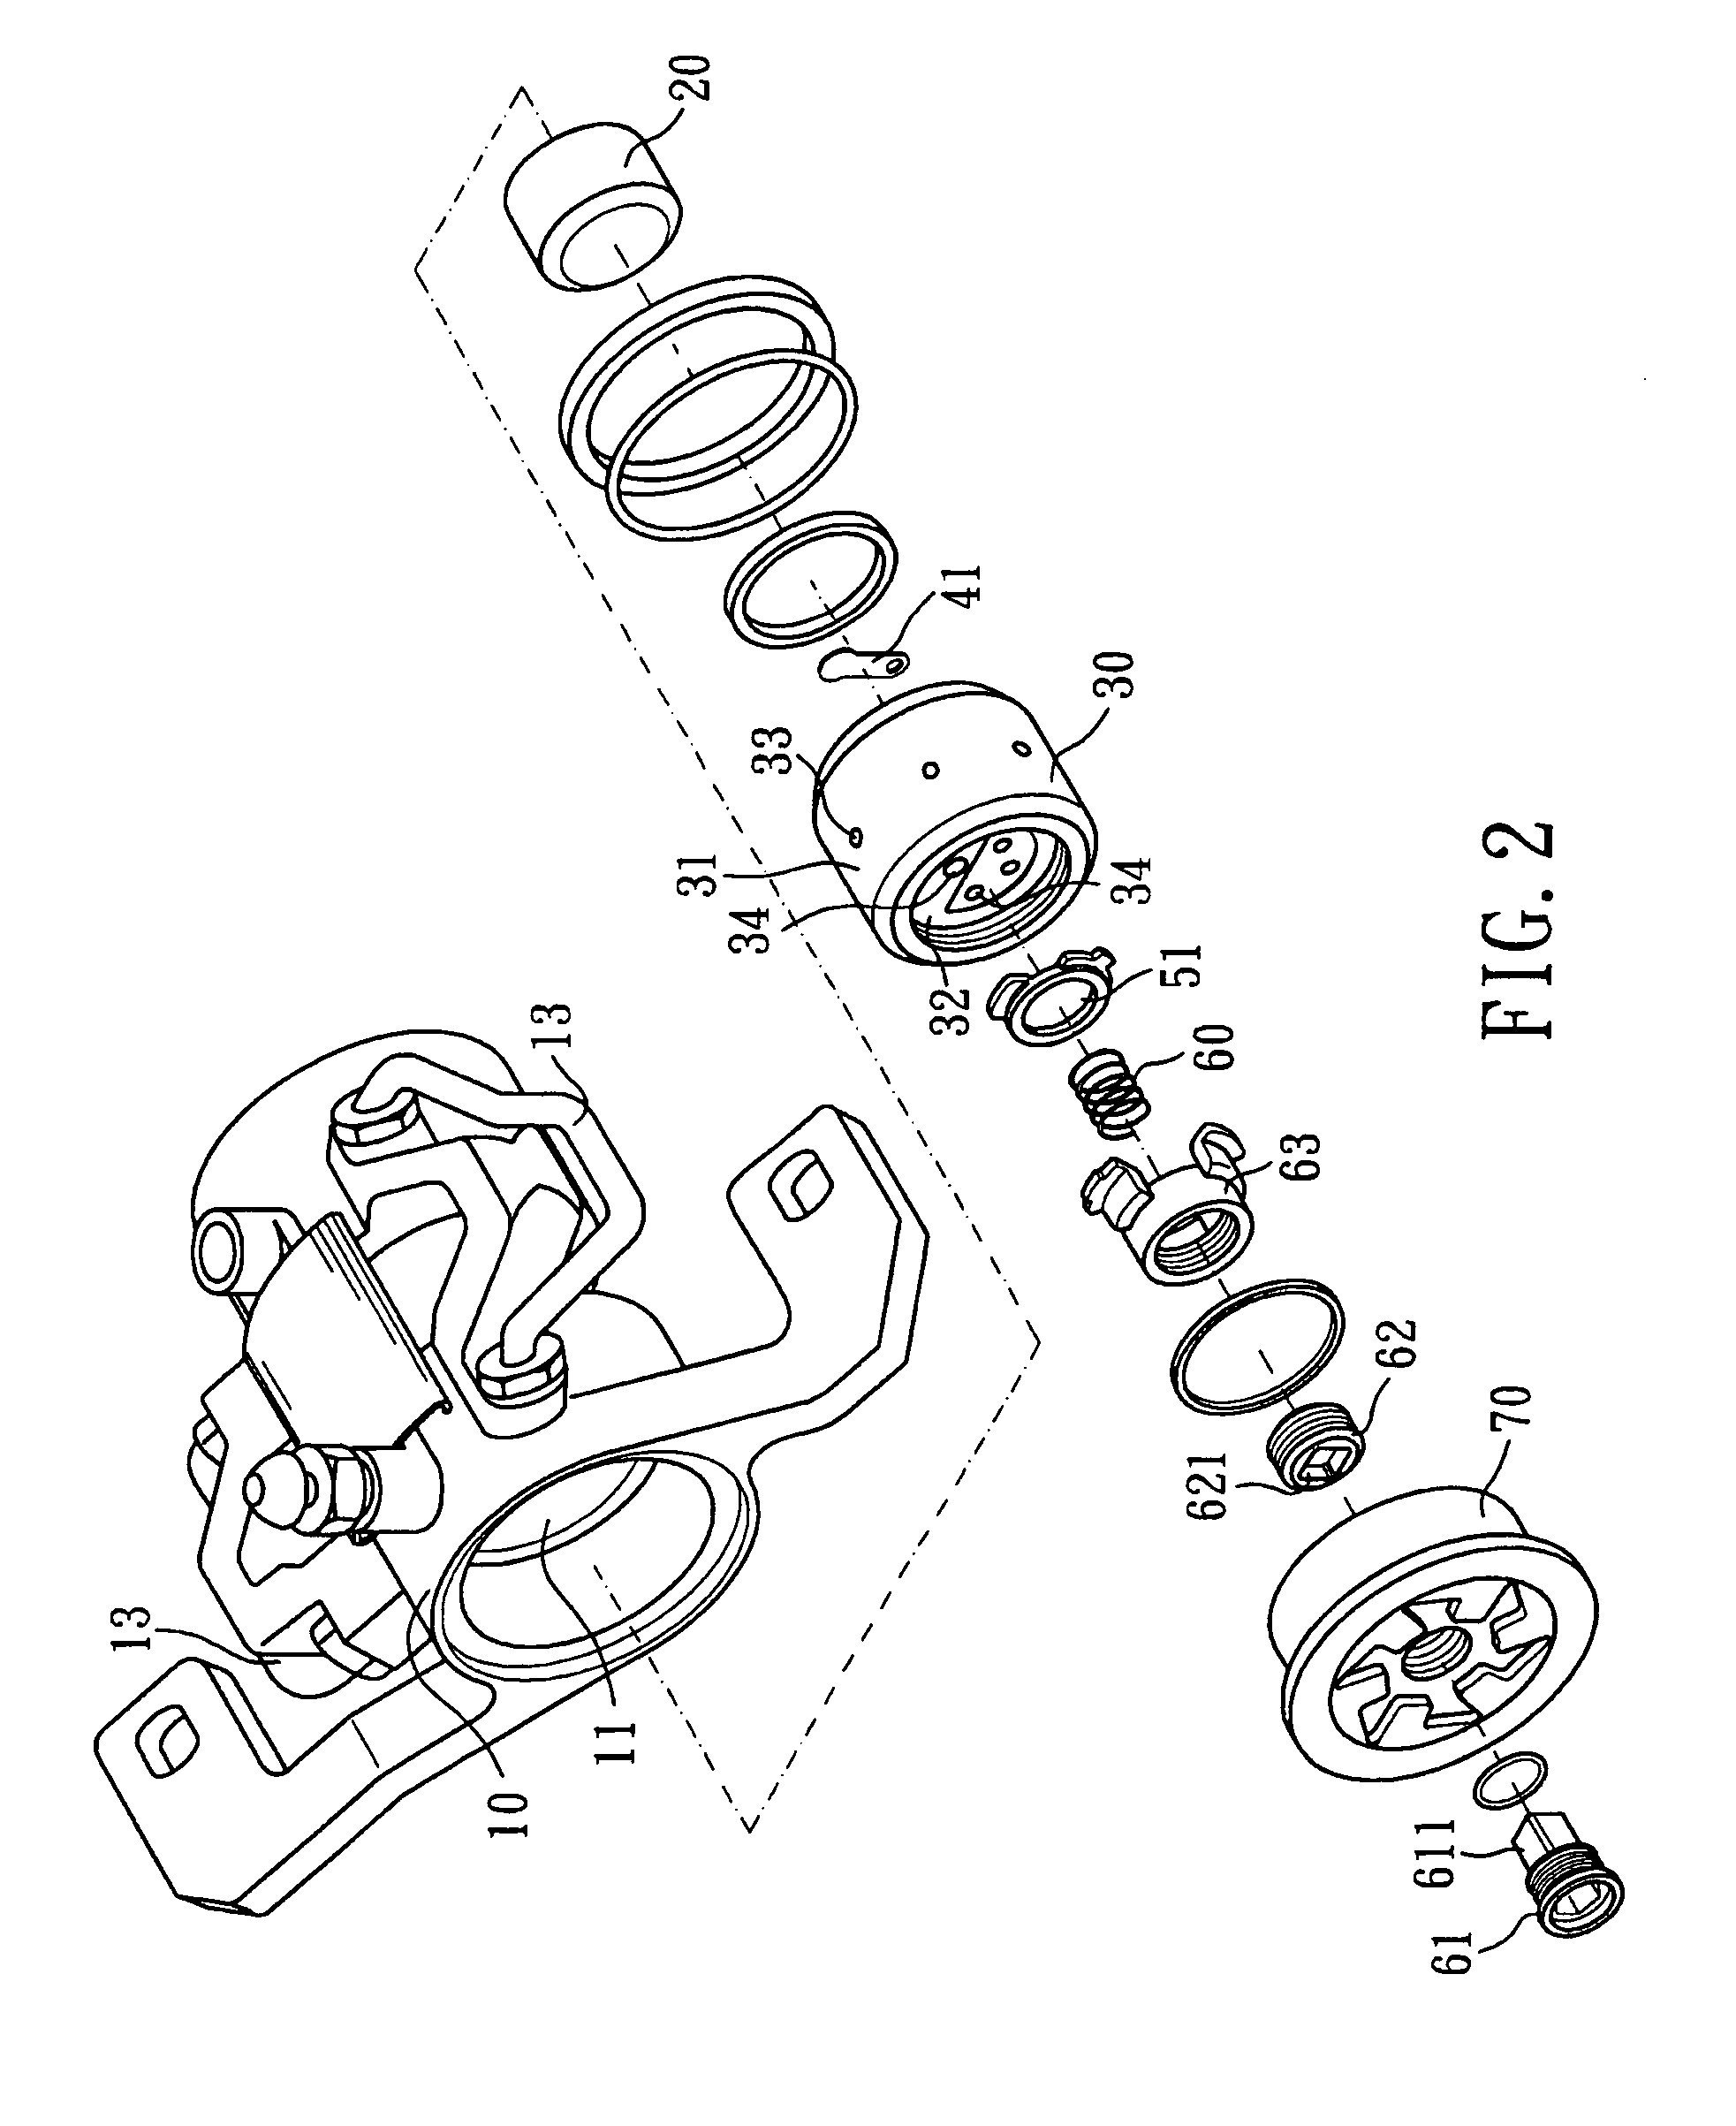 Hydraulic caliper brake assembly for a bicycle